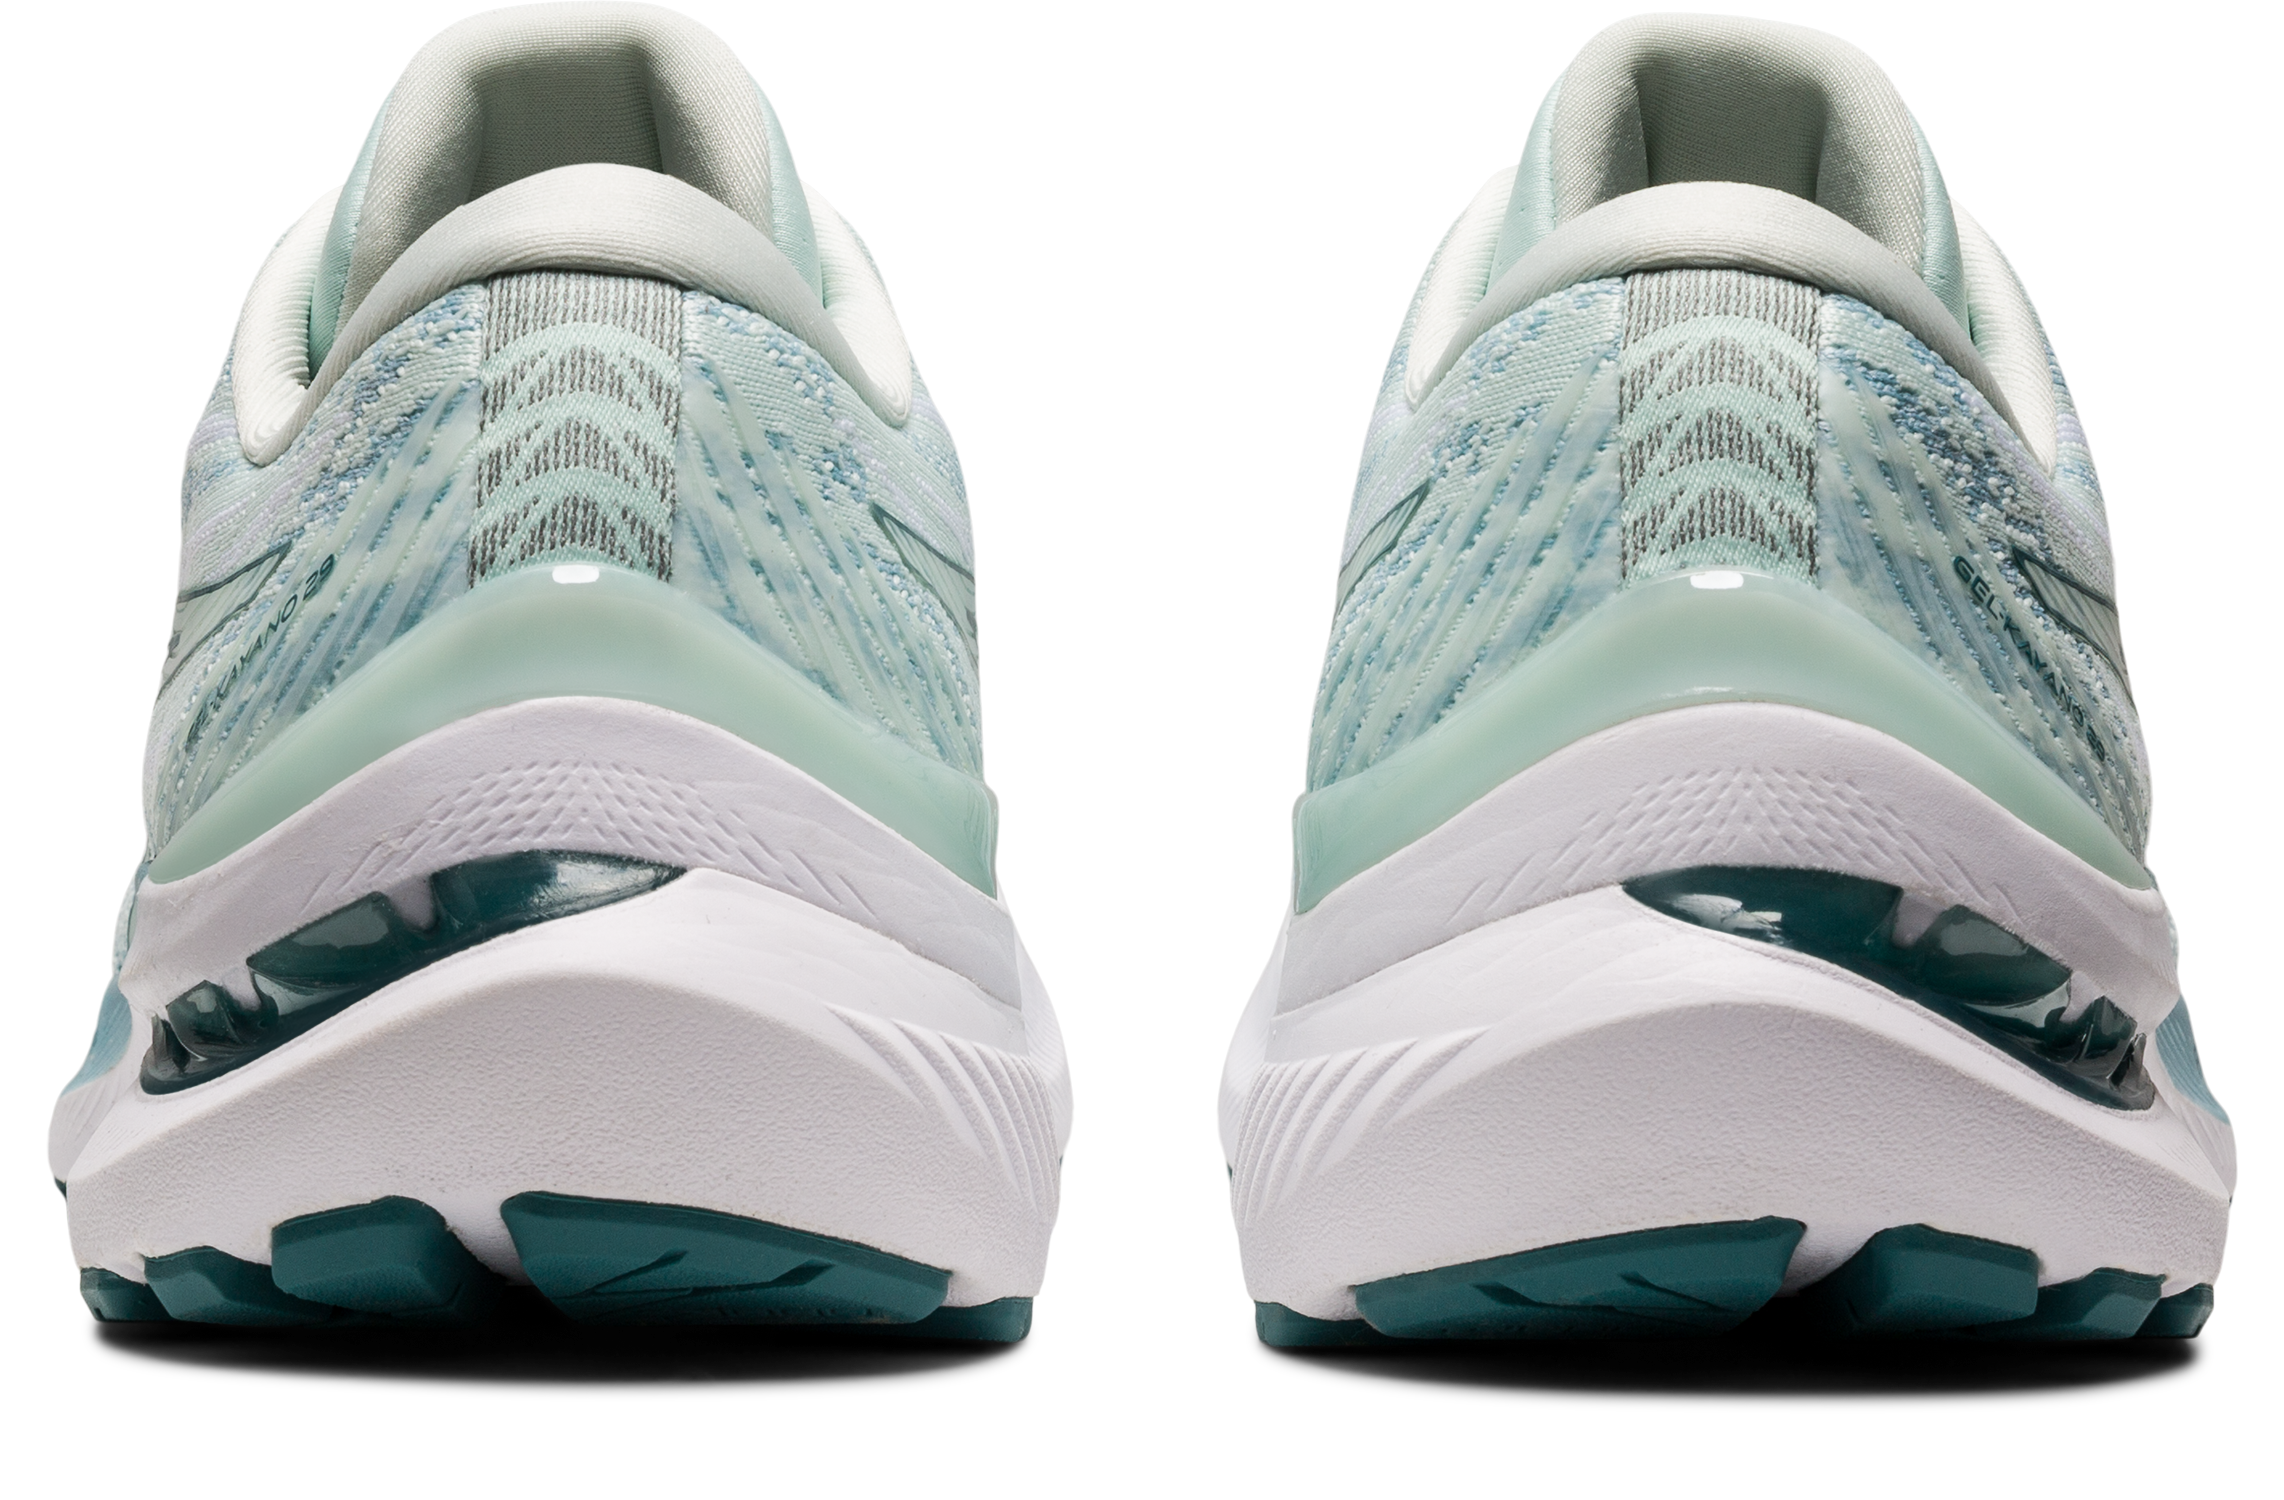 Asics Women's Gel-Kayano 29 Running Shoes in Soothing Sea/Misty Pine